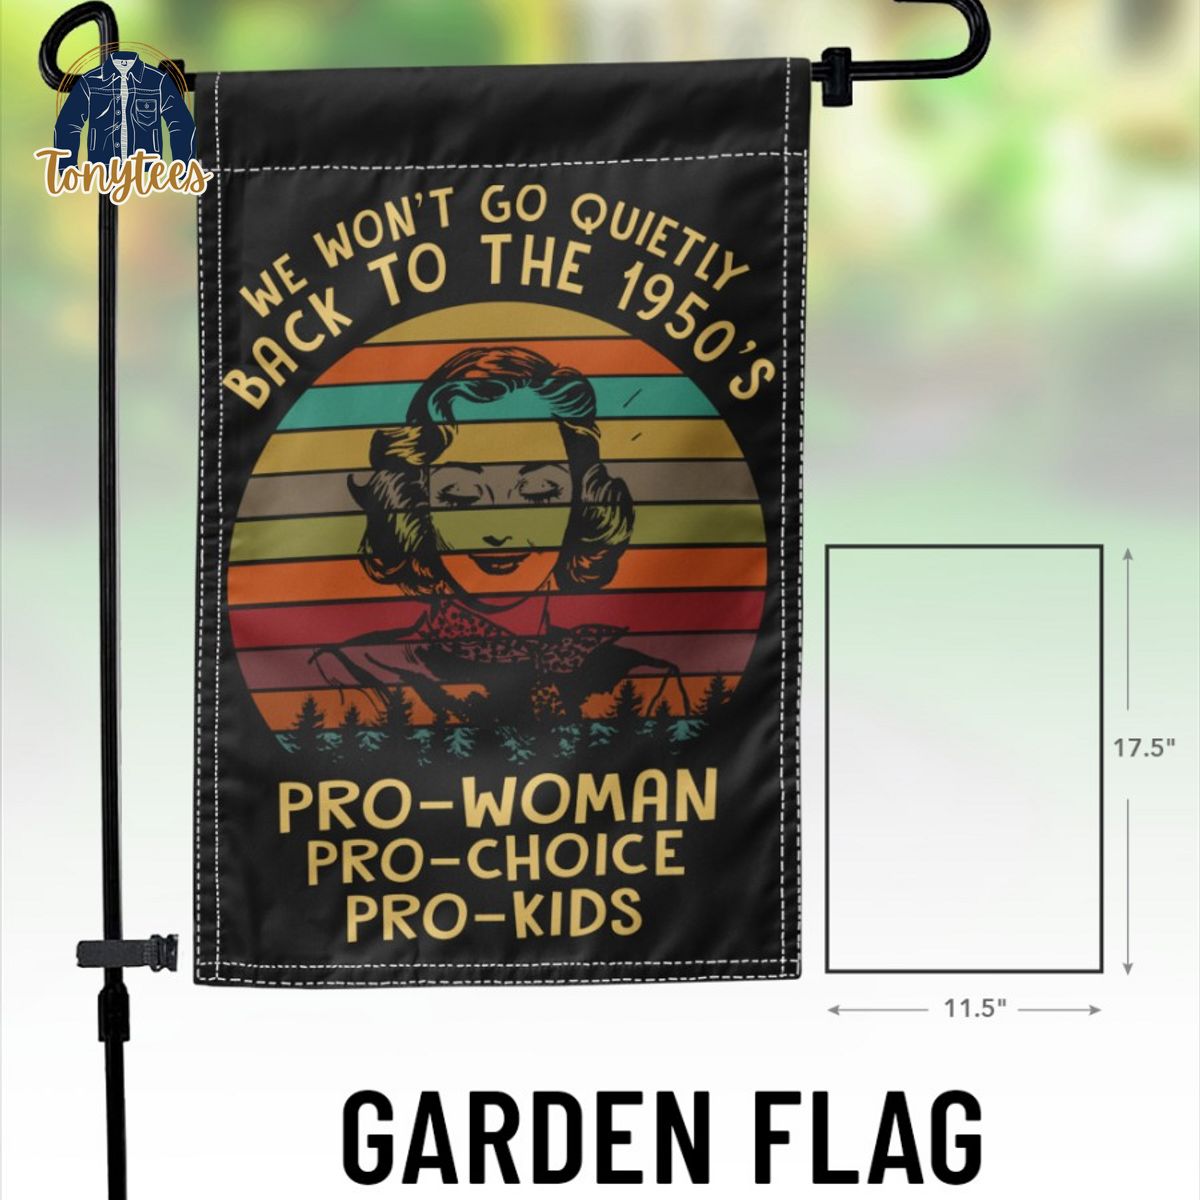 We won’t go quietly back to the 1950’s pro-woman pro-choice pro-kids flag